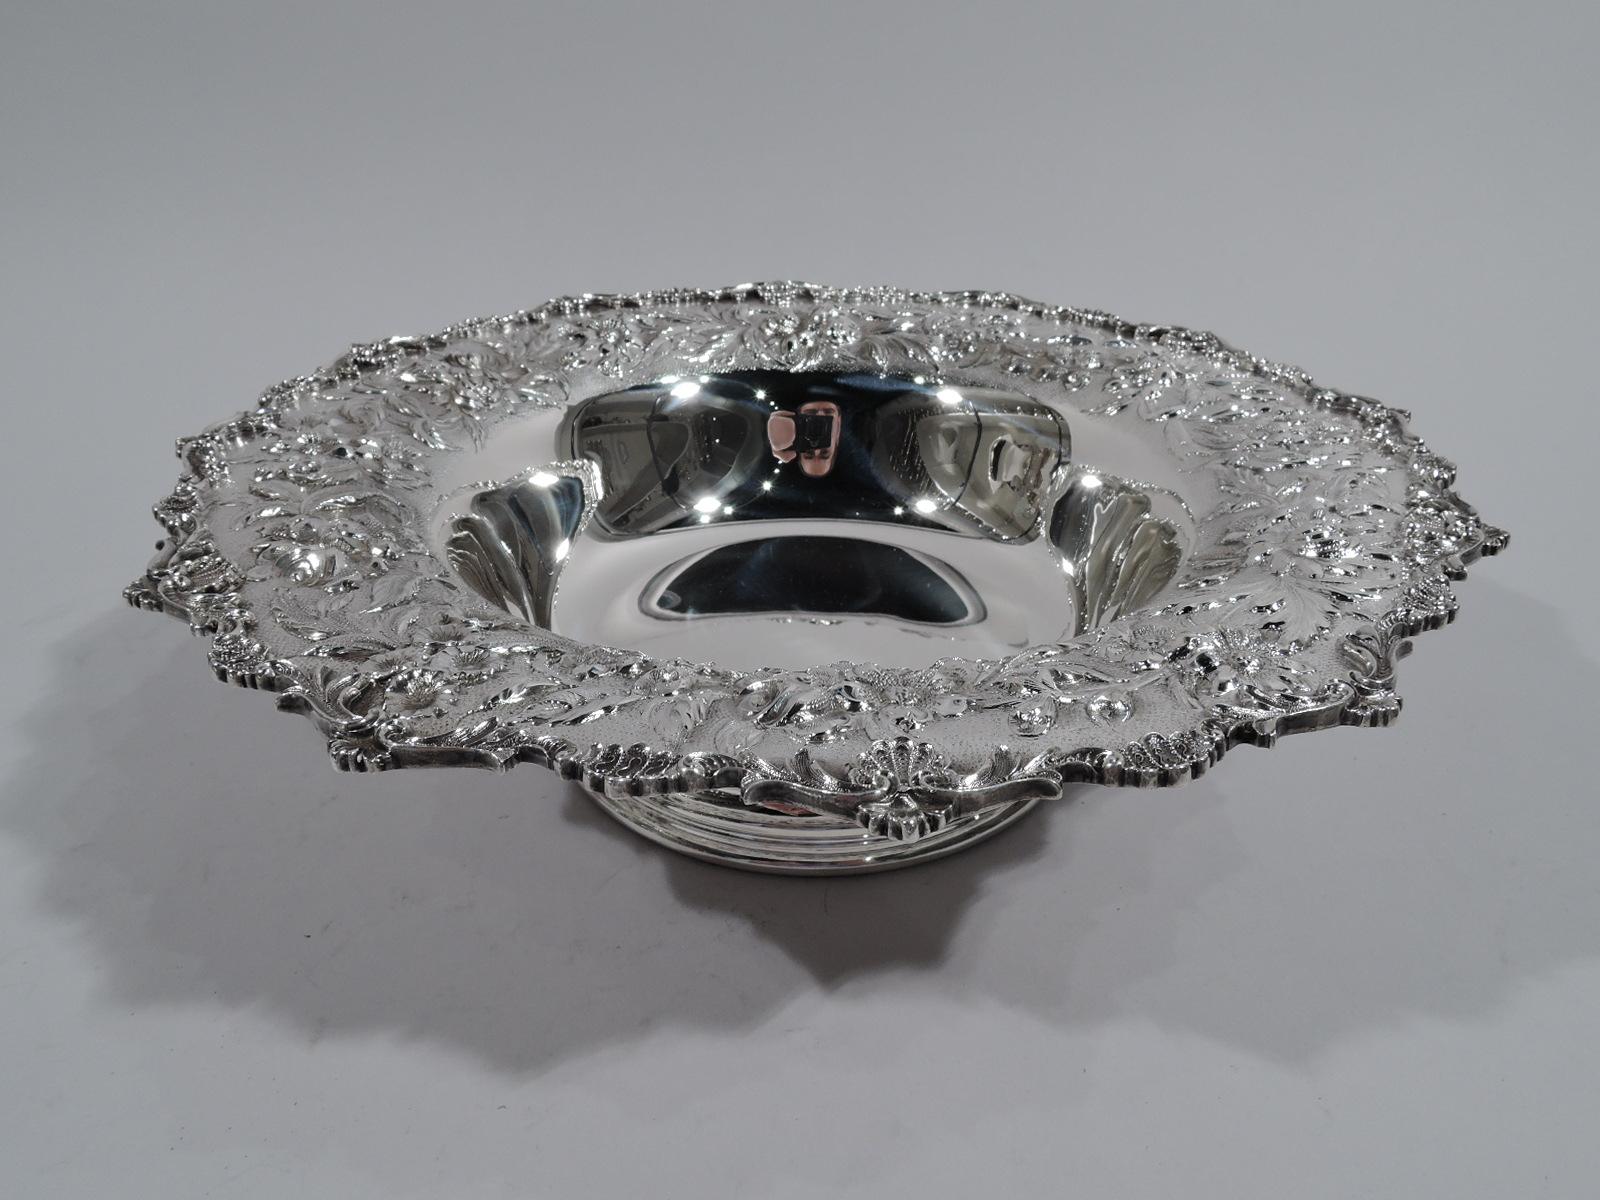 Pretty sterling silver bowl. Made by S. Kirk & Son in Baltimore. Plain well with tapering sides and raised and spread foot. Wide and gently curved shoulder with repousse floral garland on stippled ground. Rim has applied scallop shells, leaves, and